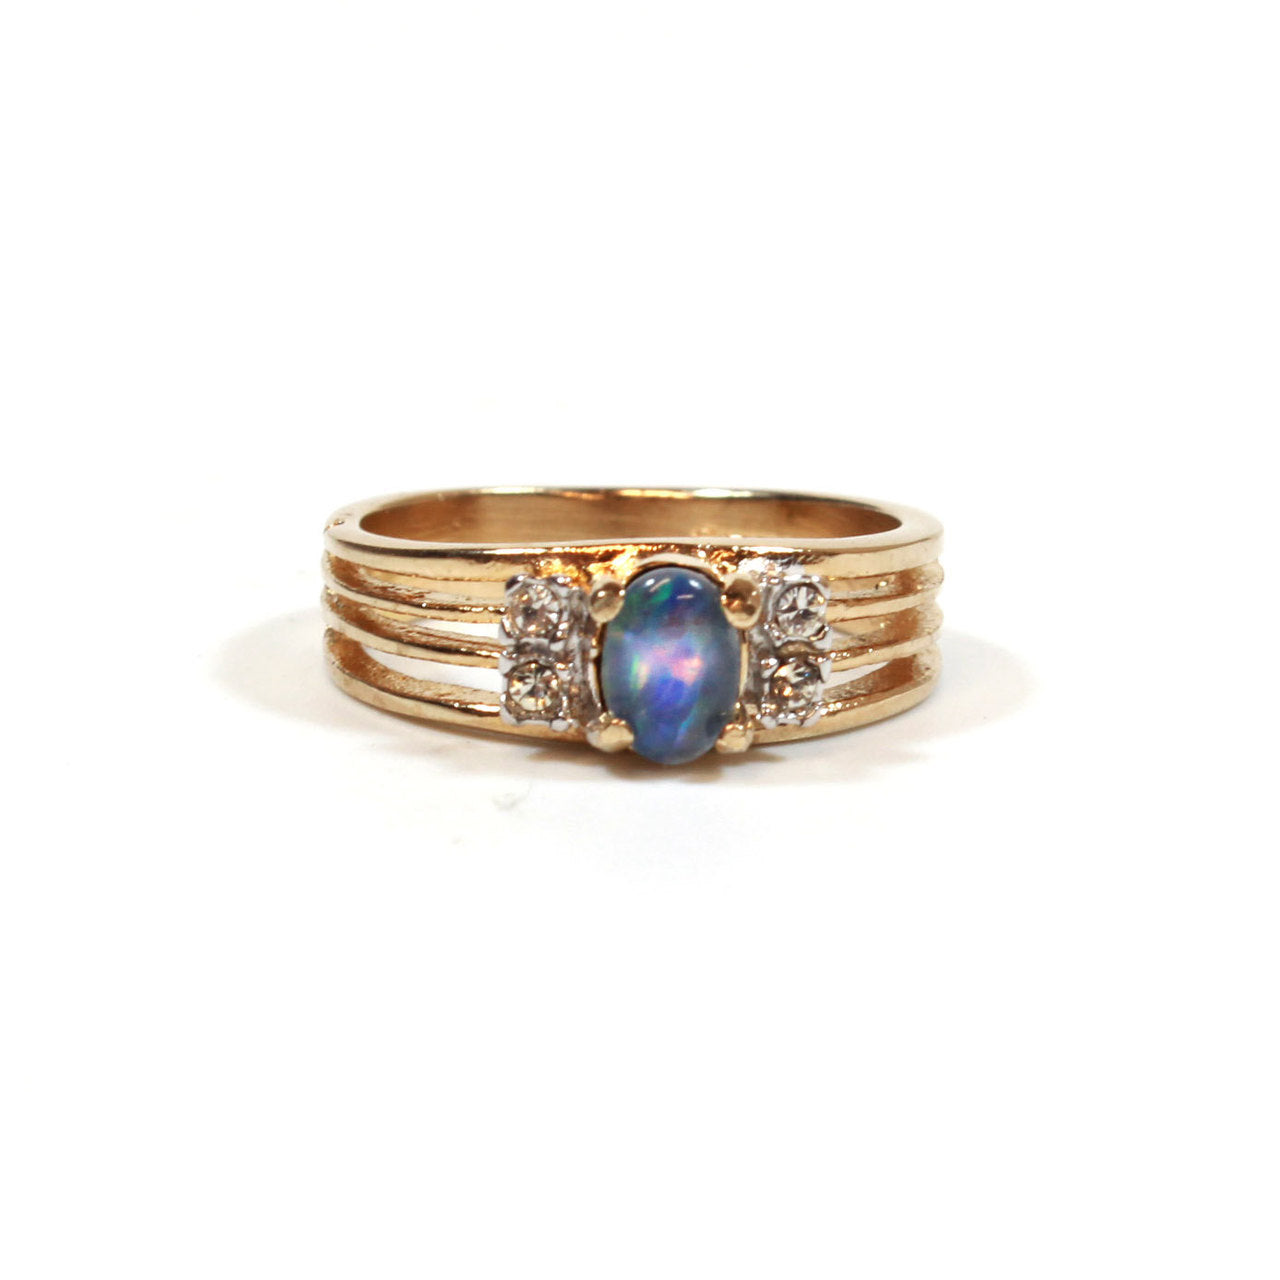 Vintage Jewelry Genuine Jelly Opal with Clear Crystal Accents on Sides Ring, Plated in 18kt Electroplated Yellow Gold Made in the USA